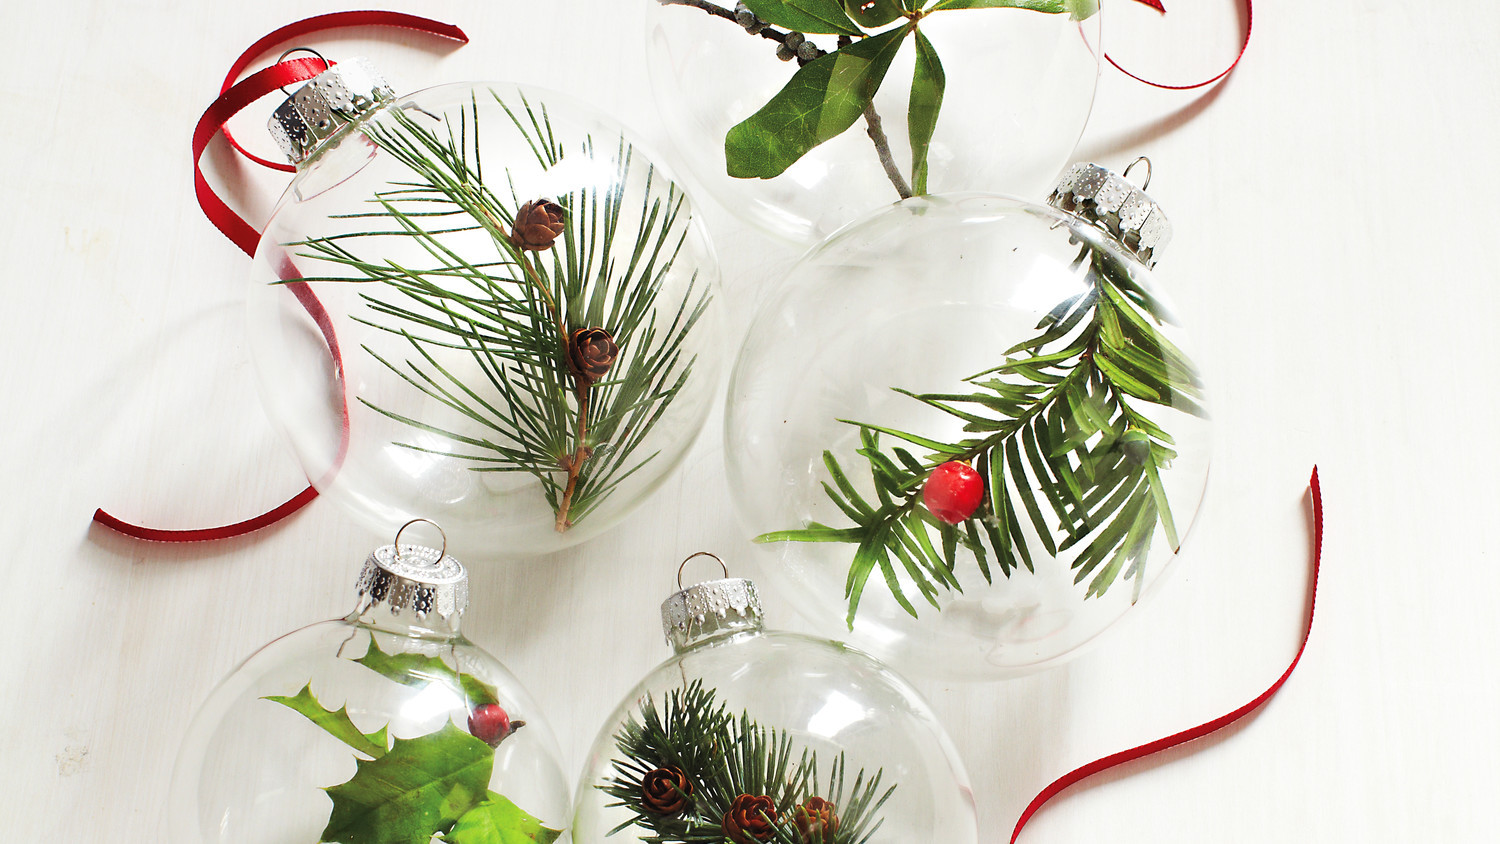 DIY Christmas Balls
 20 of Our Most Memorable DIY Christmas Ornament Projects